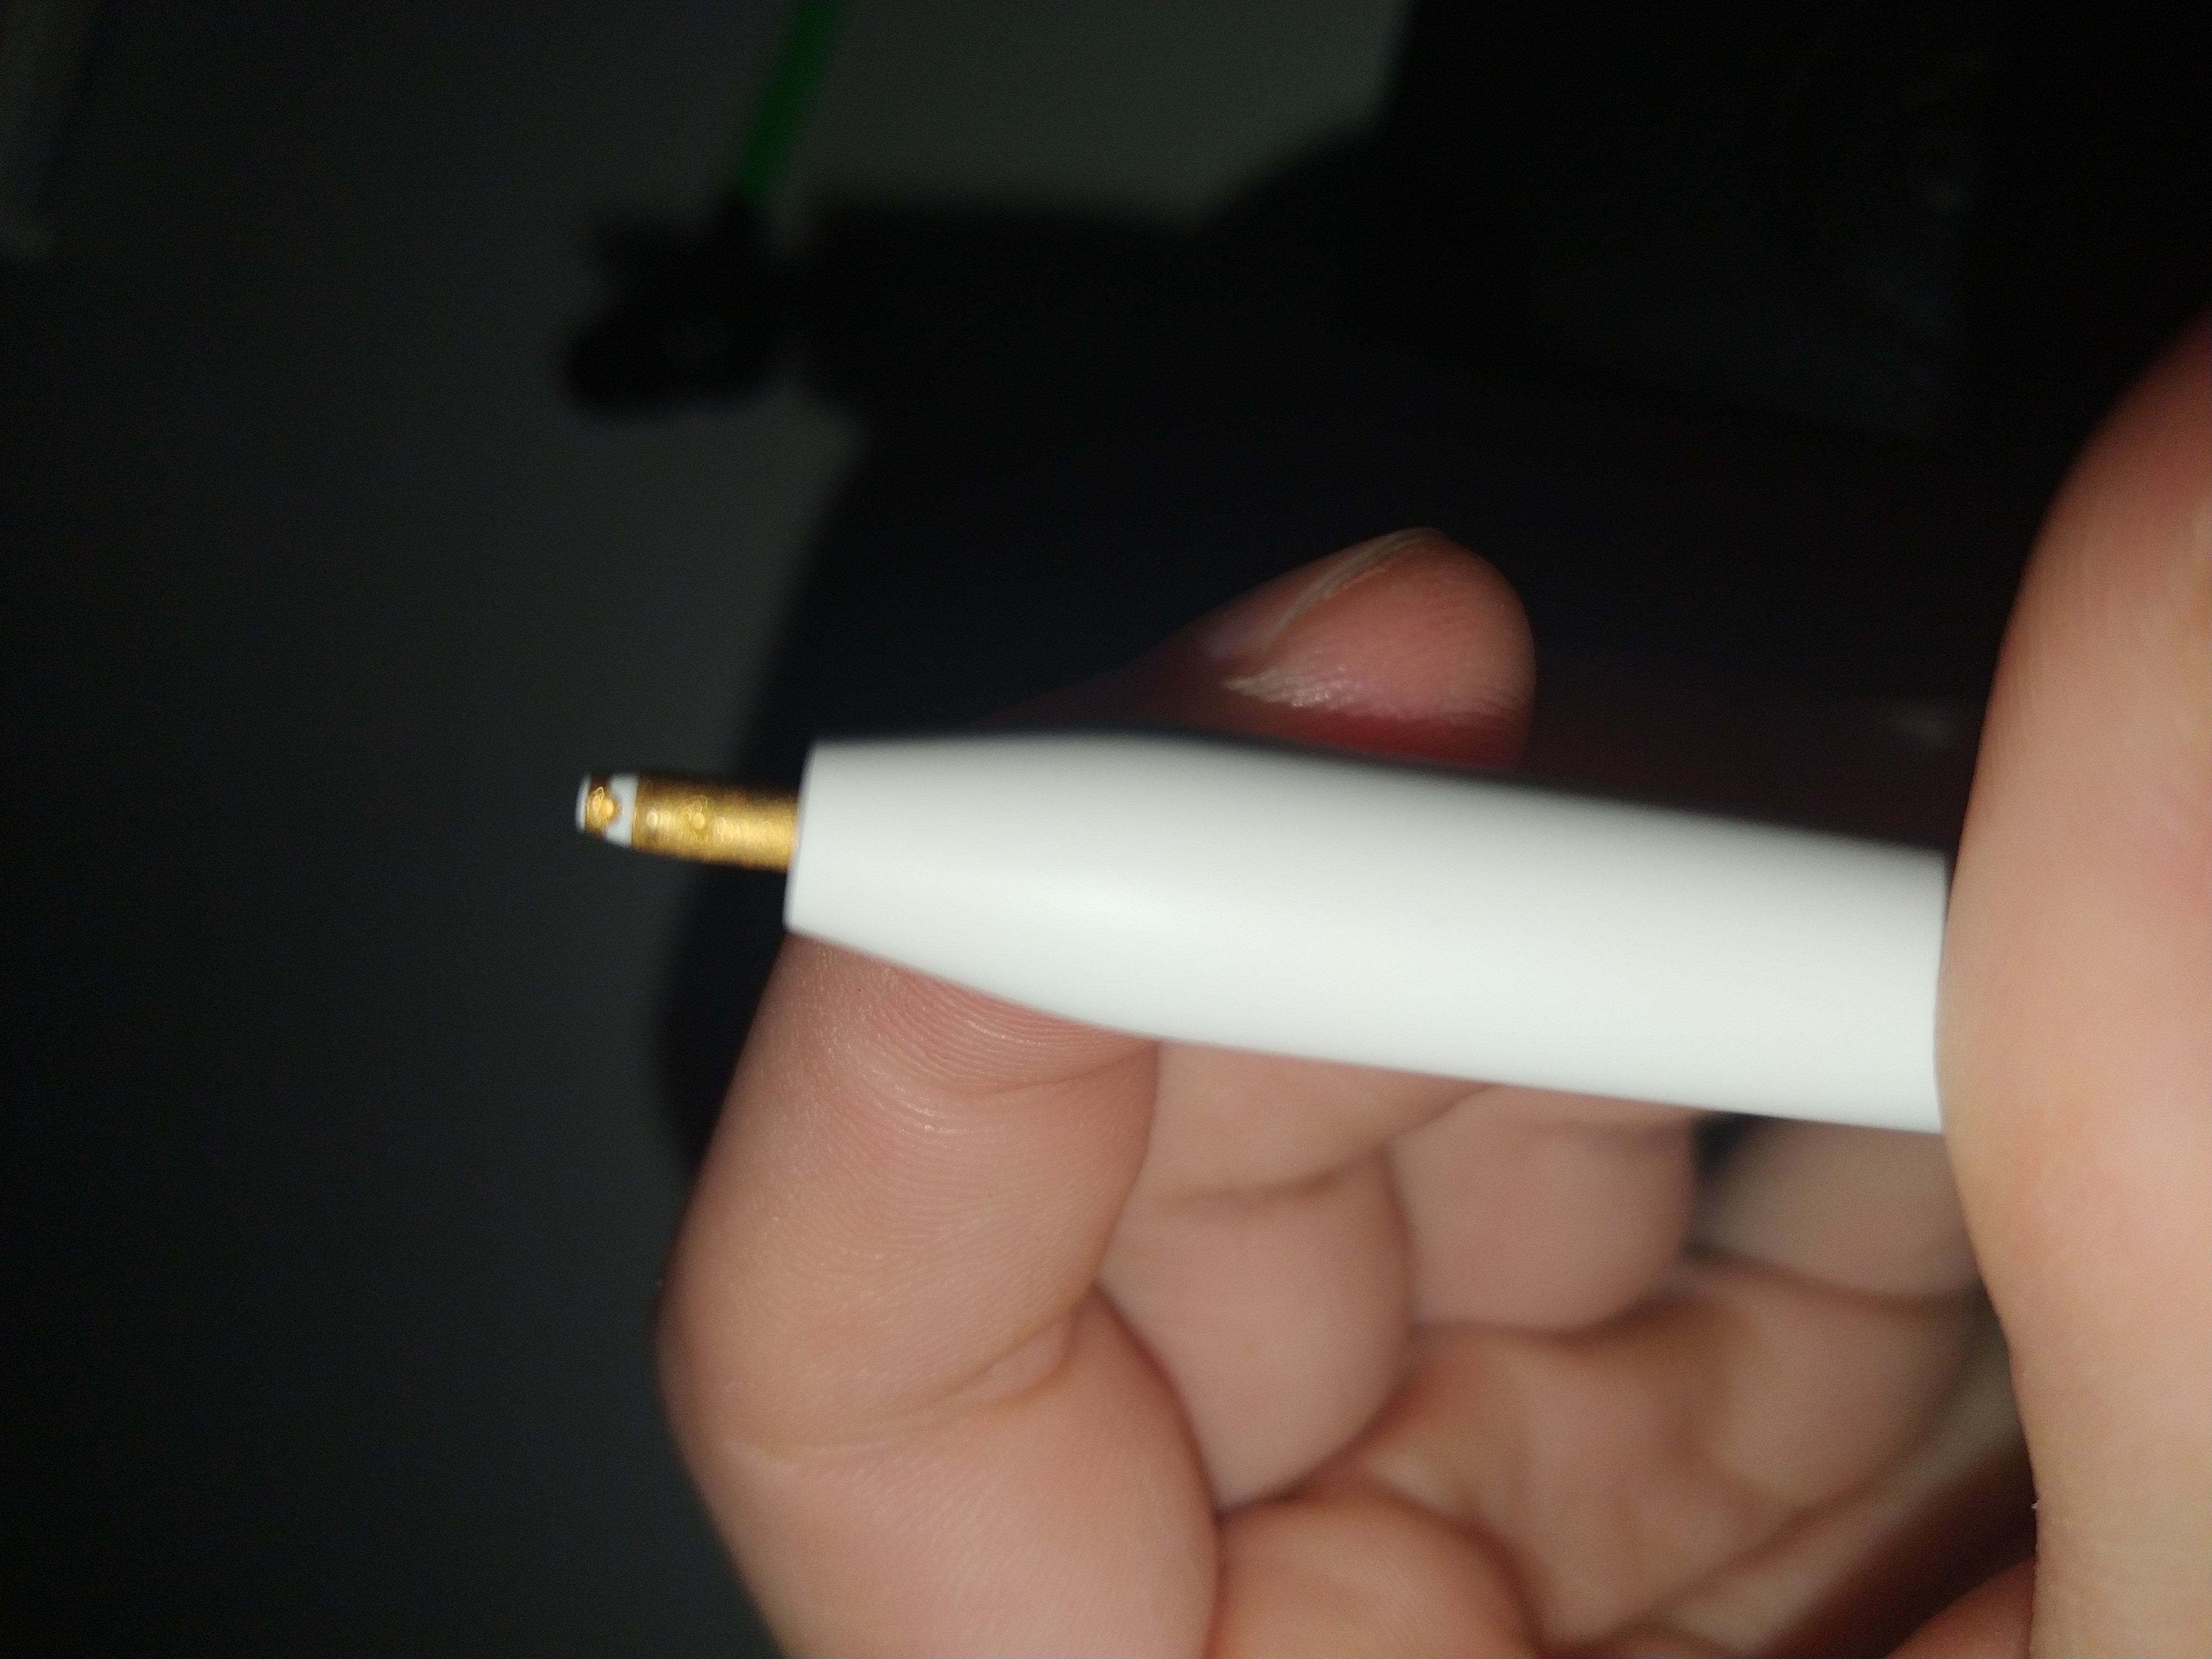 Does the Apple Pencil 2 fall off easily?